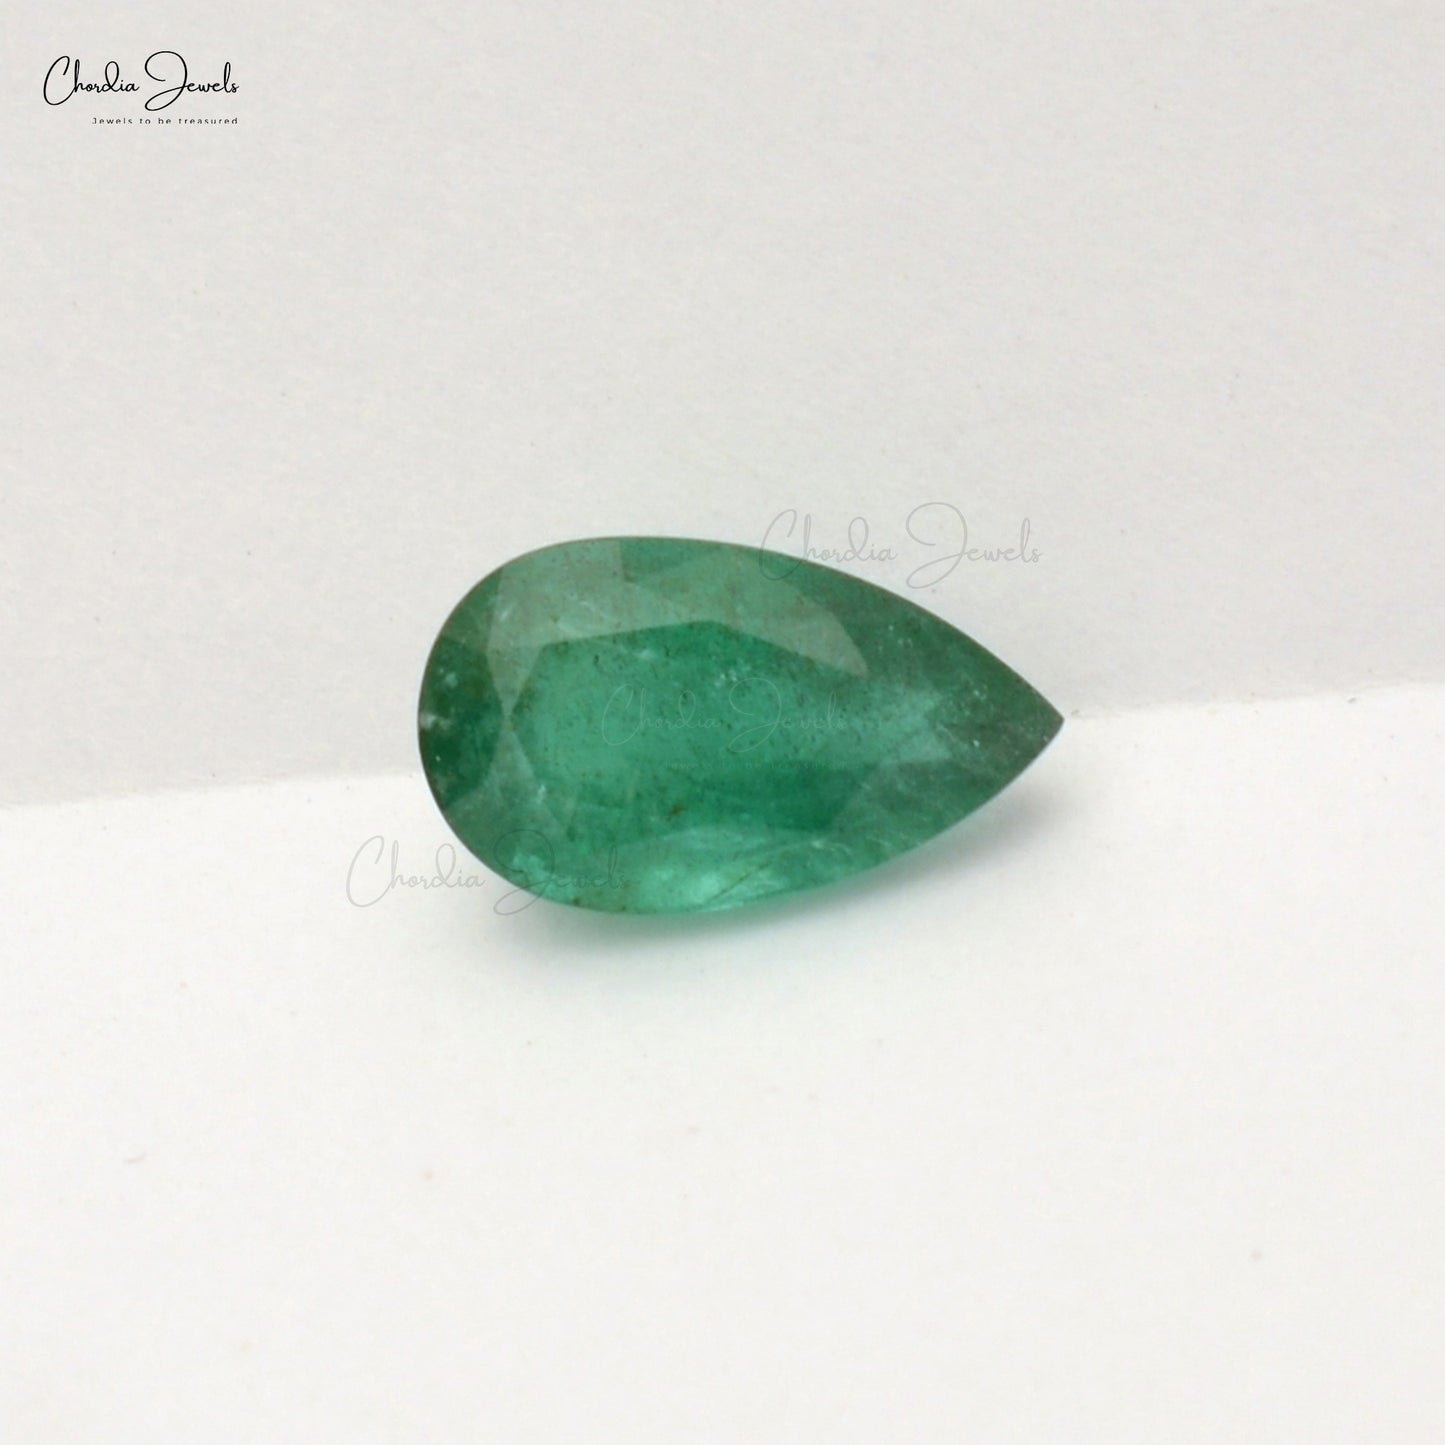 Loose Emeralds For Sale